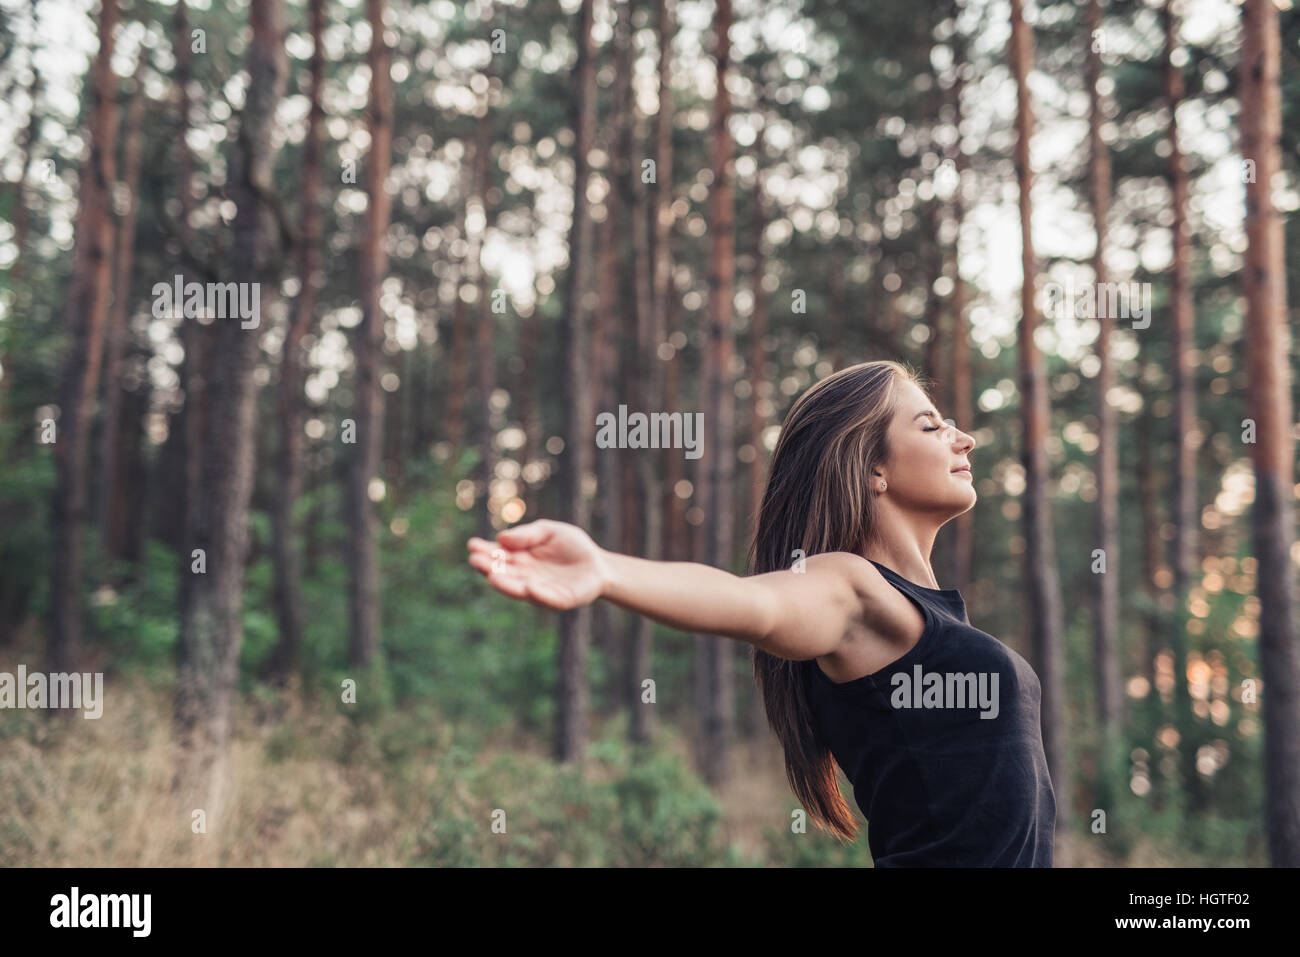 Young woman raising her arms to nature Stock Photo